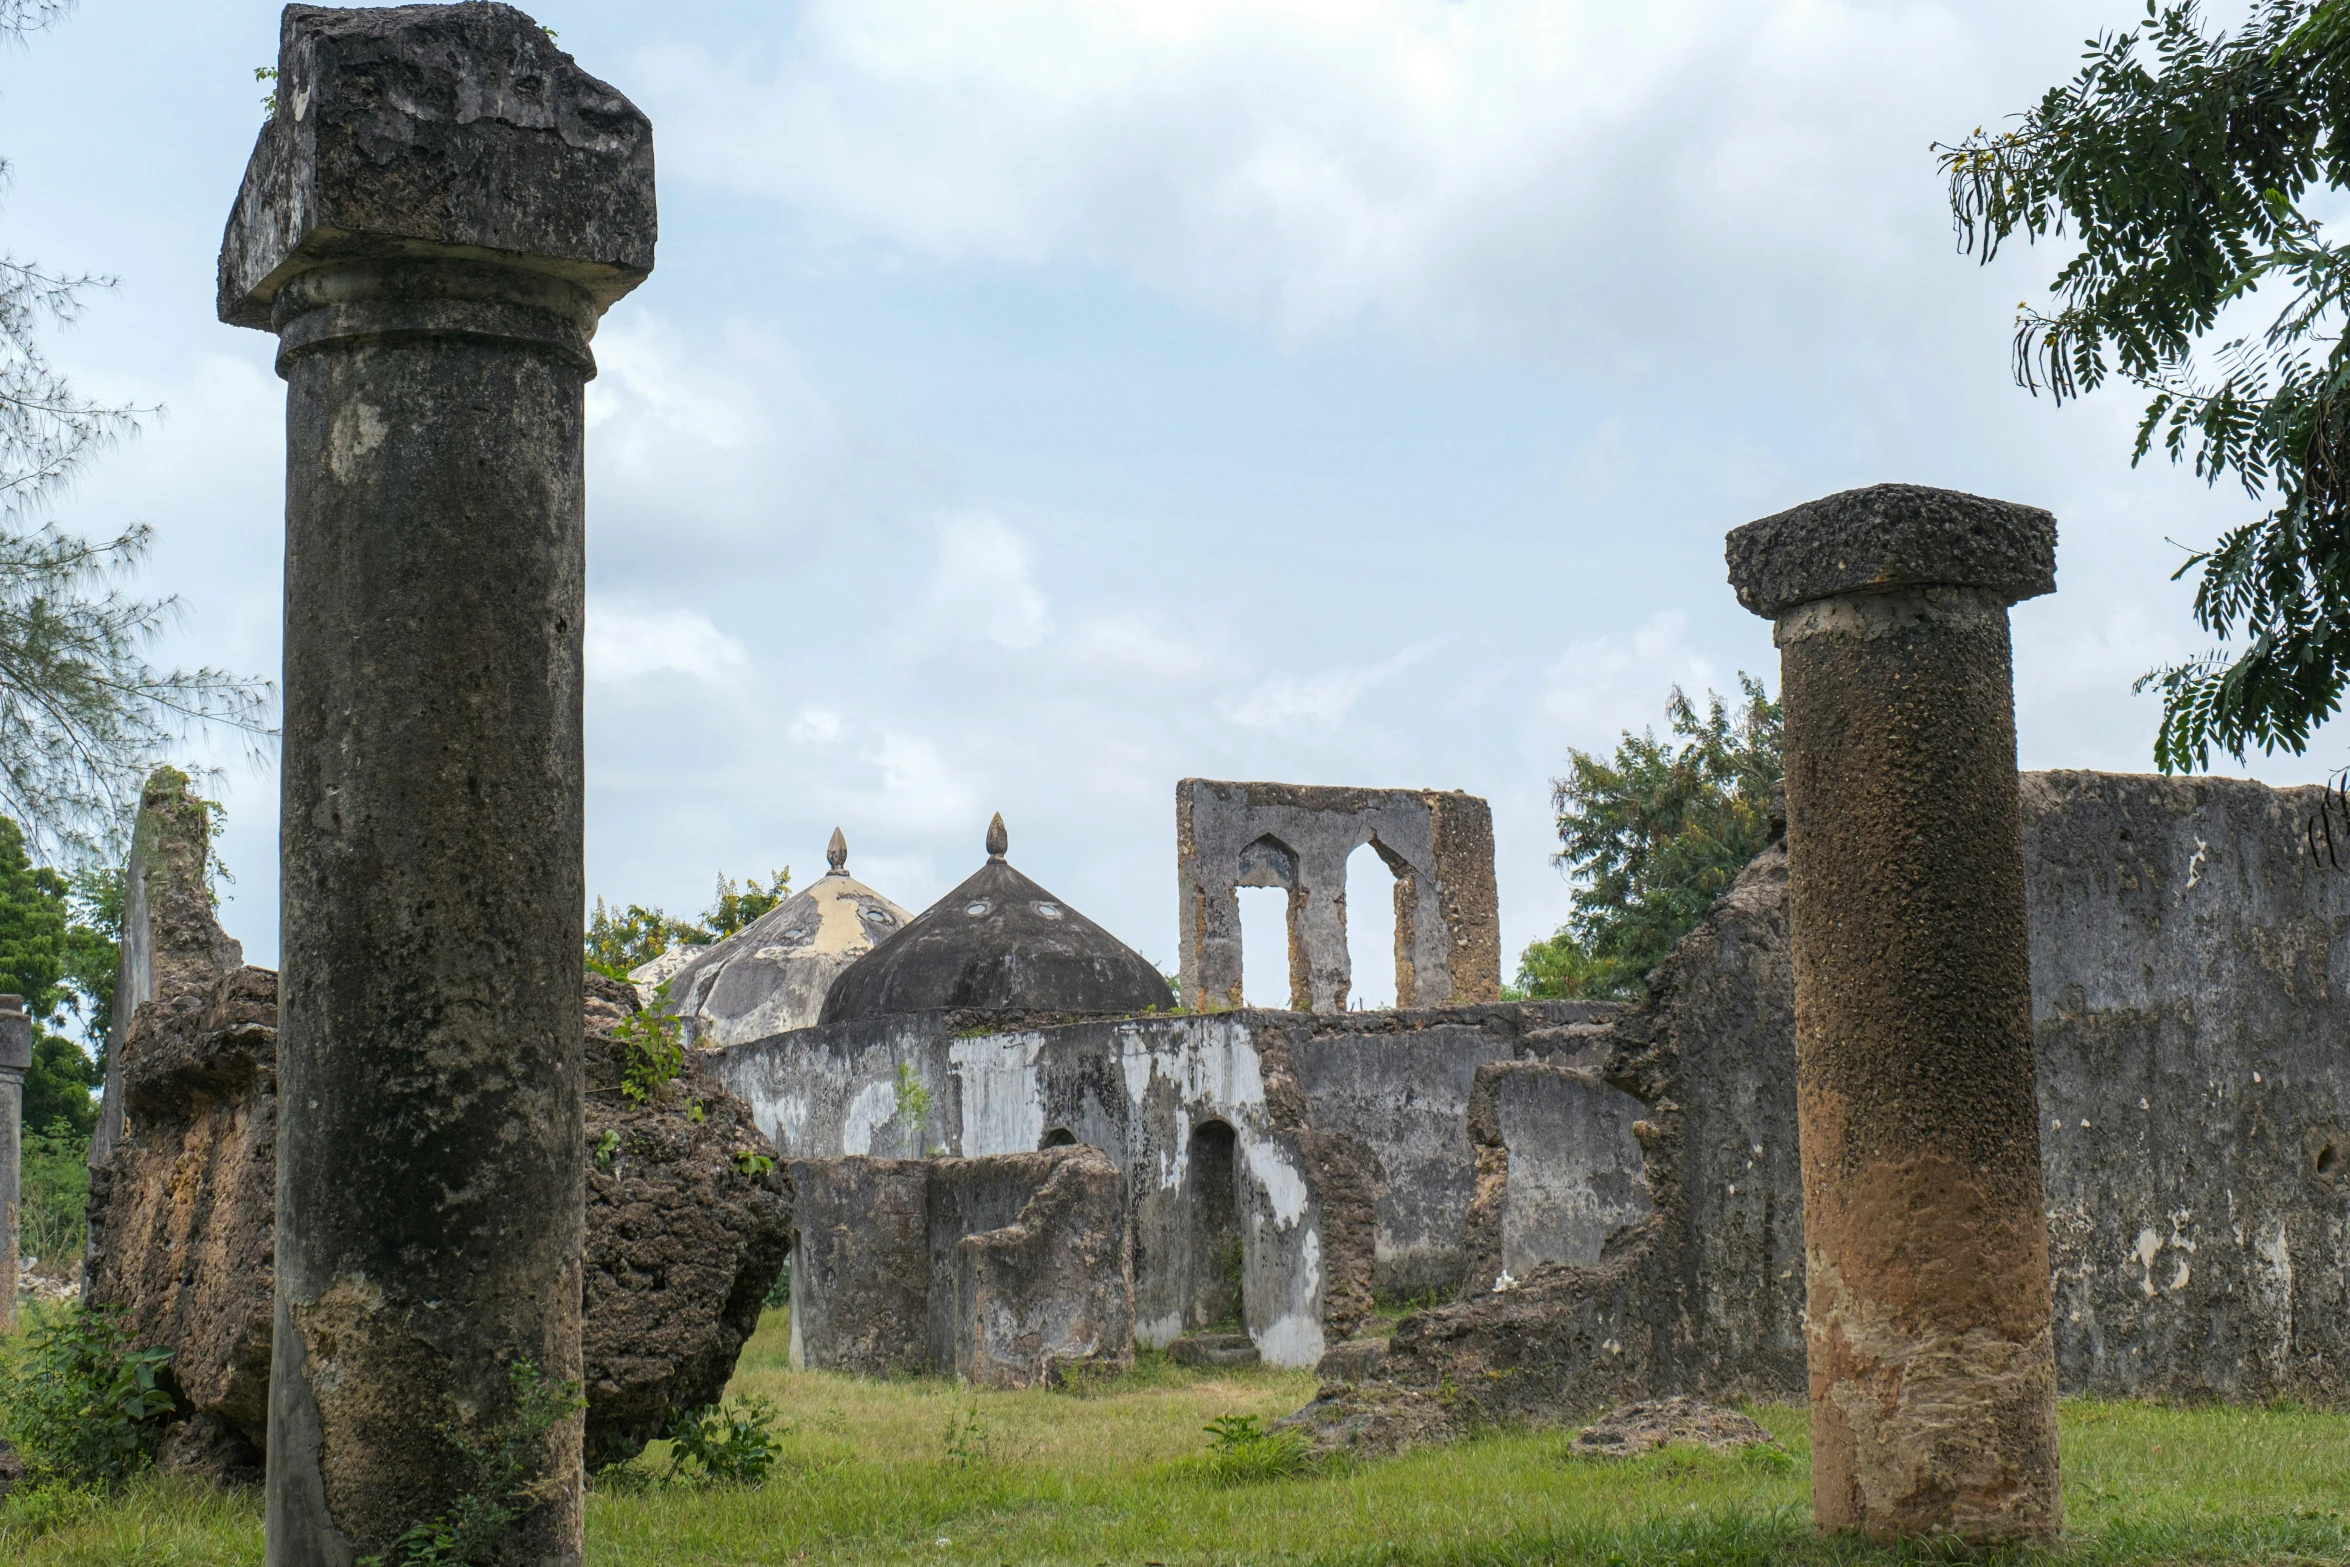 there are ruins of many different sizes, some of which appear to have been built in the 1800's